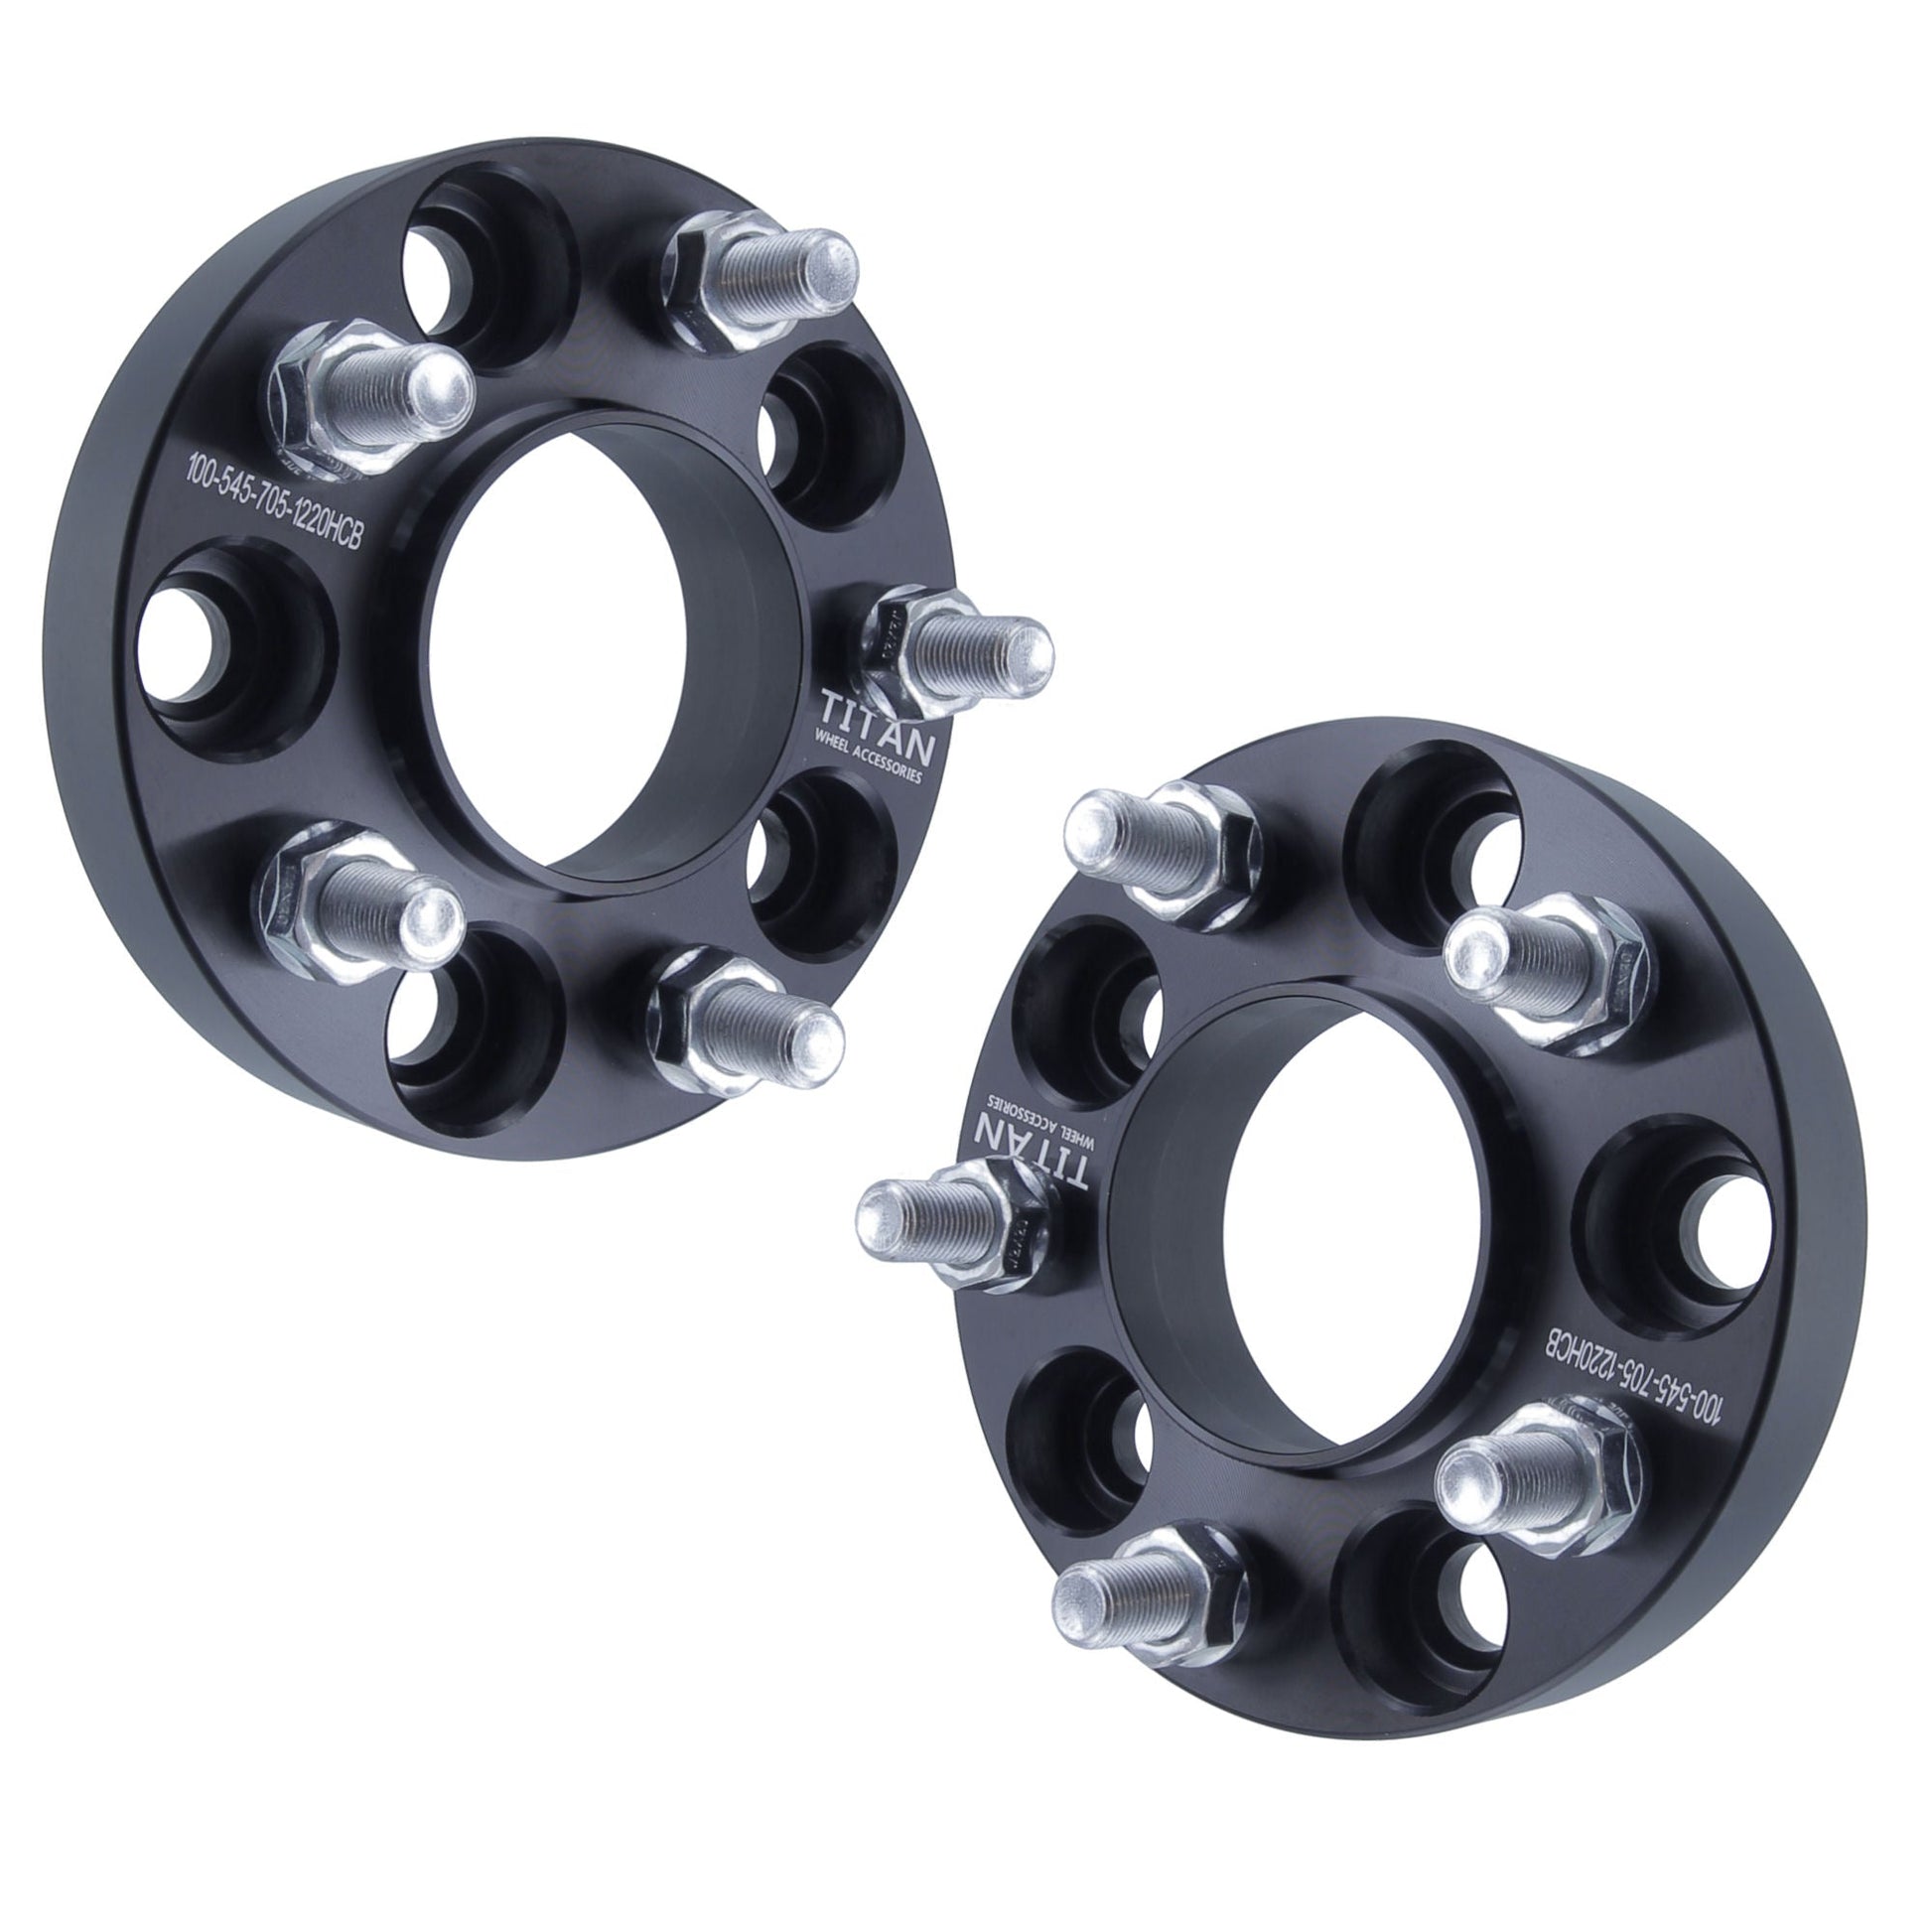 1.25" (32mm) Titan Wheel Spacers for Ford Mustang Ranger Edge Explorer | 5x4.5 (5x114.3) | 70.5 Hubcentric |1/2x20 Studs |  Set of 4 | Titan Wheel Accessories